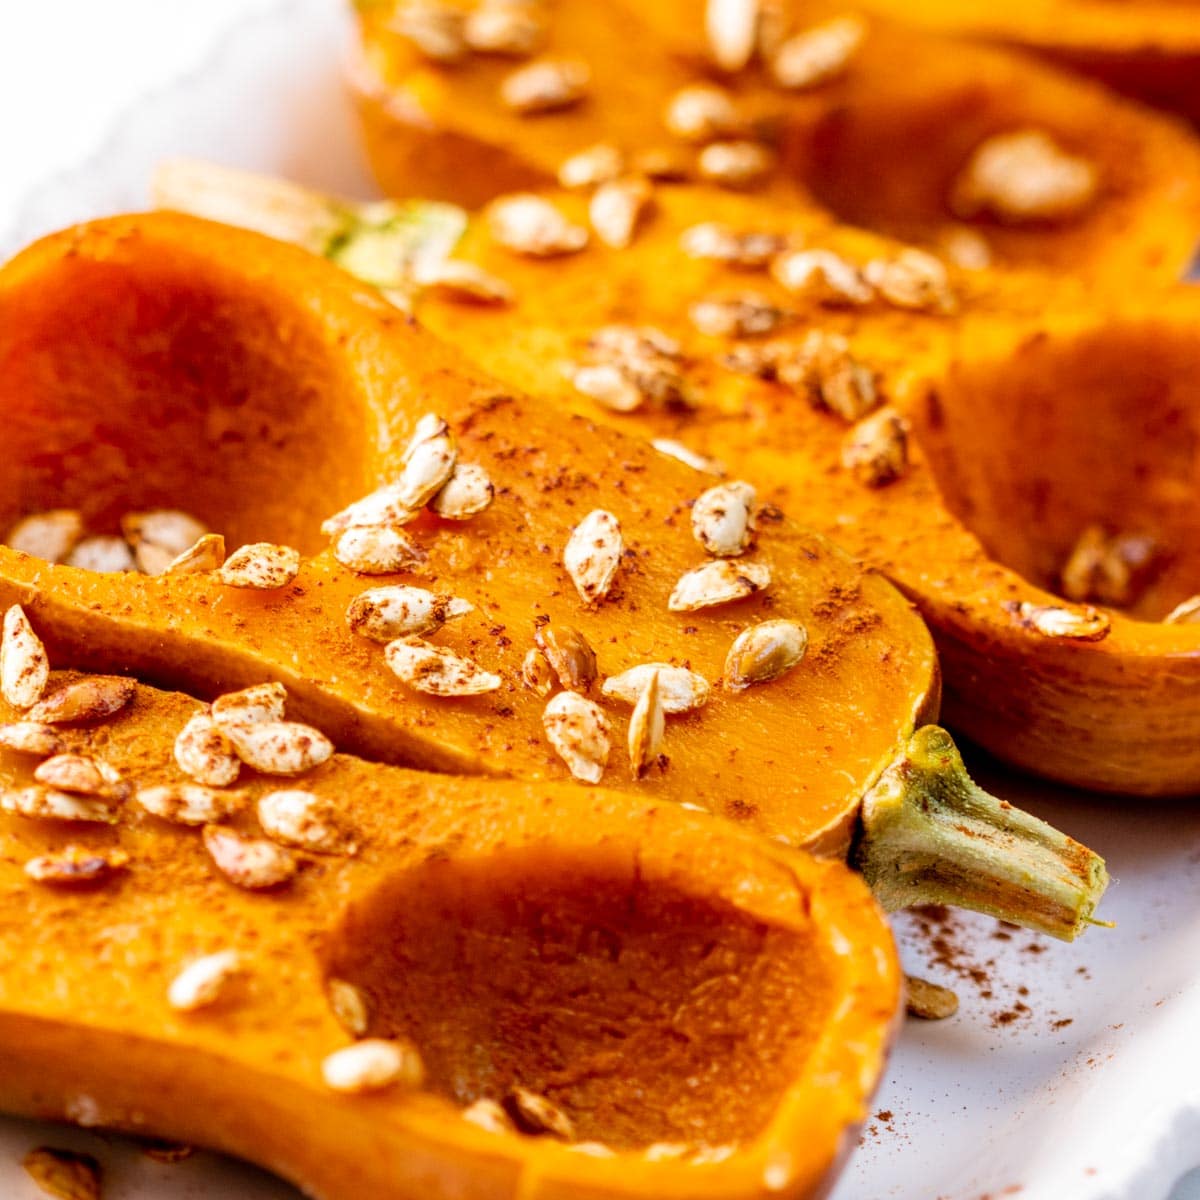 Roasted honeynut squash • We Count Carbs